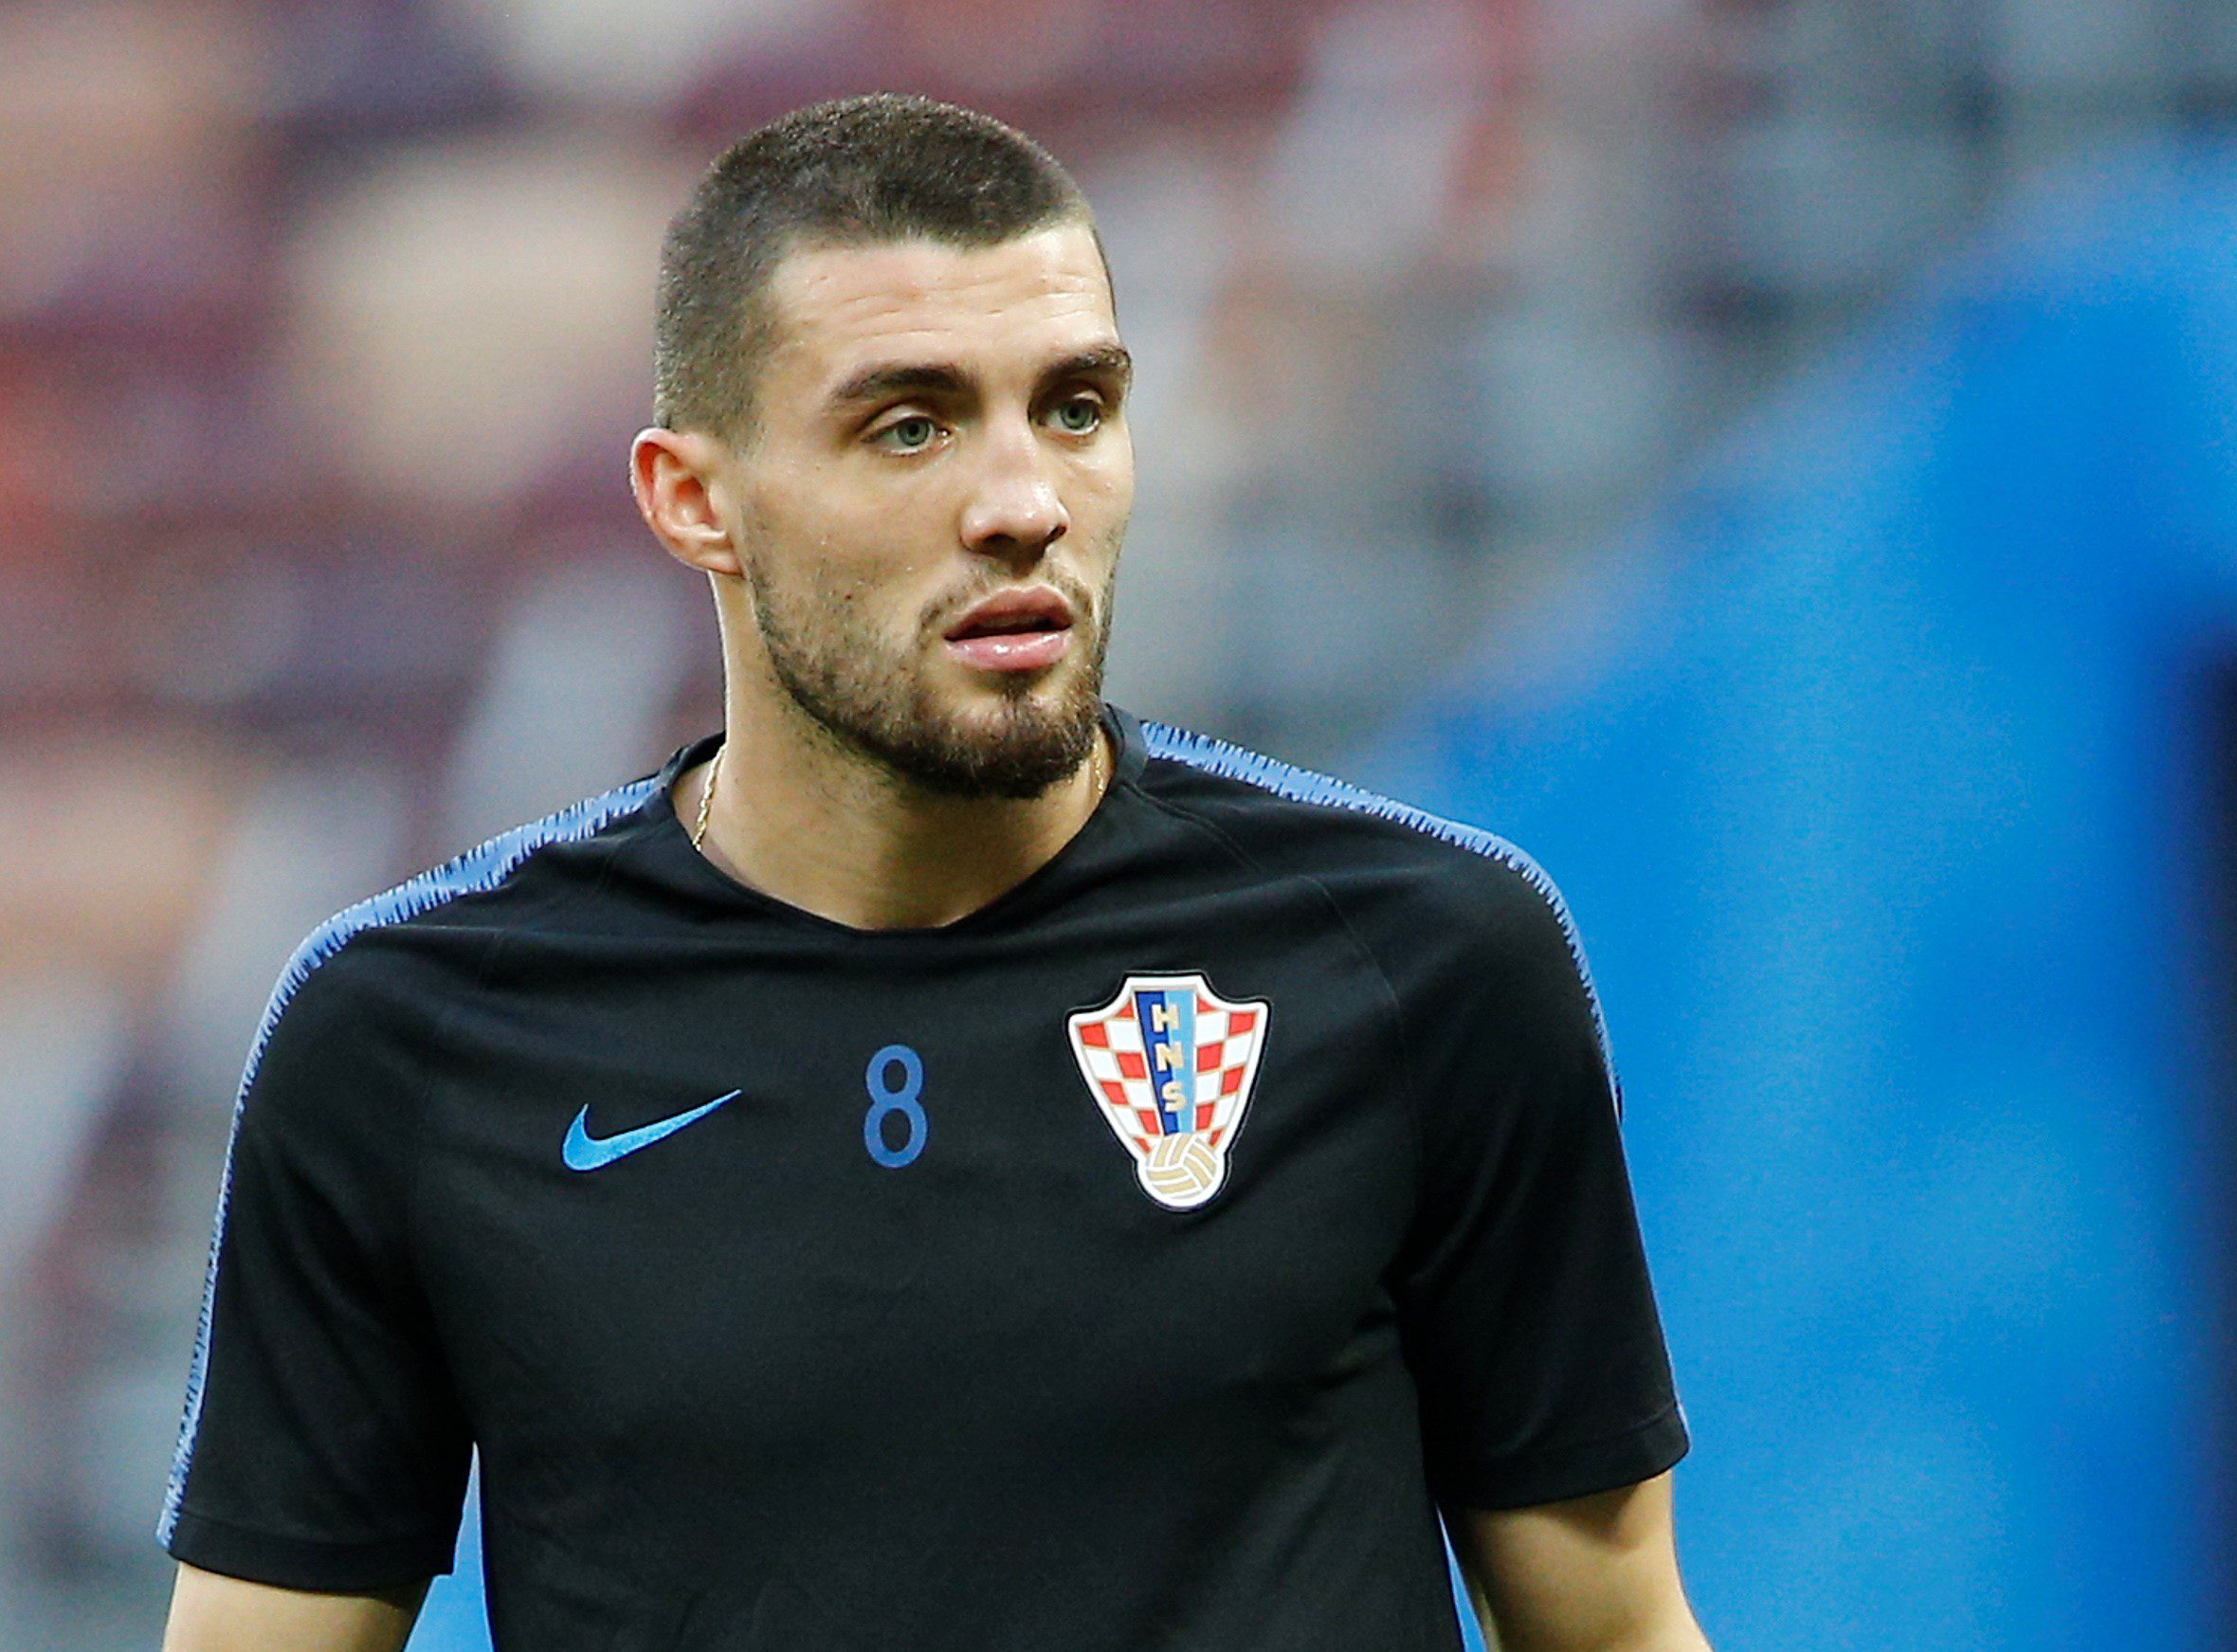 Chelsea set to sign Matteo Kovacic on loan from Real Madrid